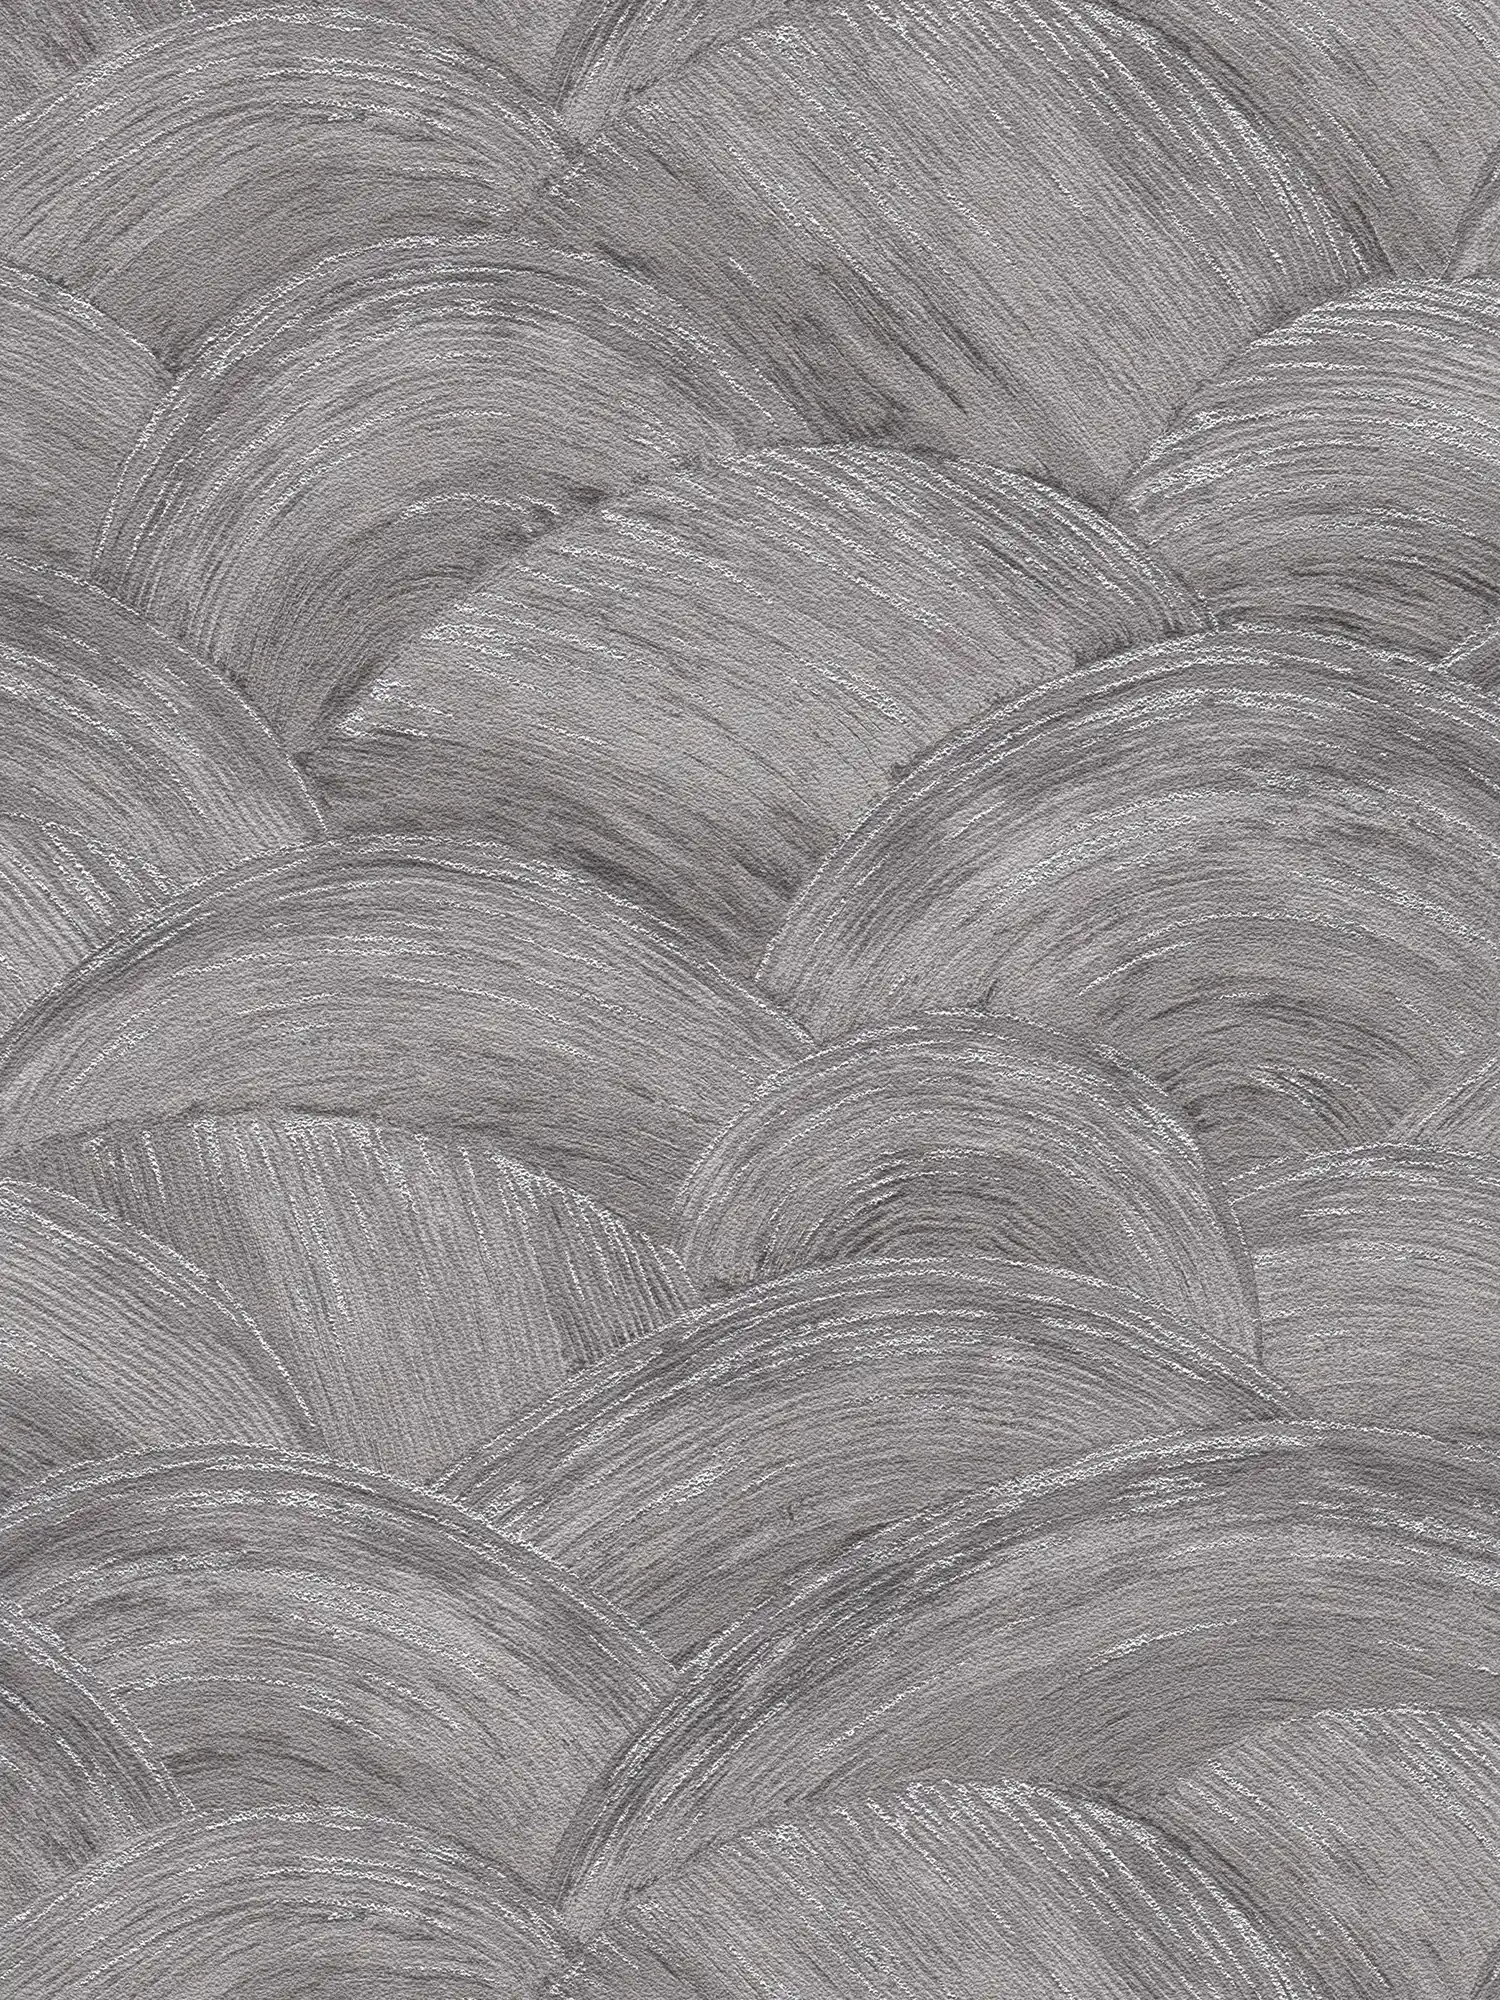             Non-woven wallpaper with wavy wipe-textured look & gloss effect - grey, silver
        